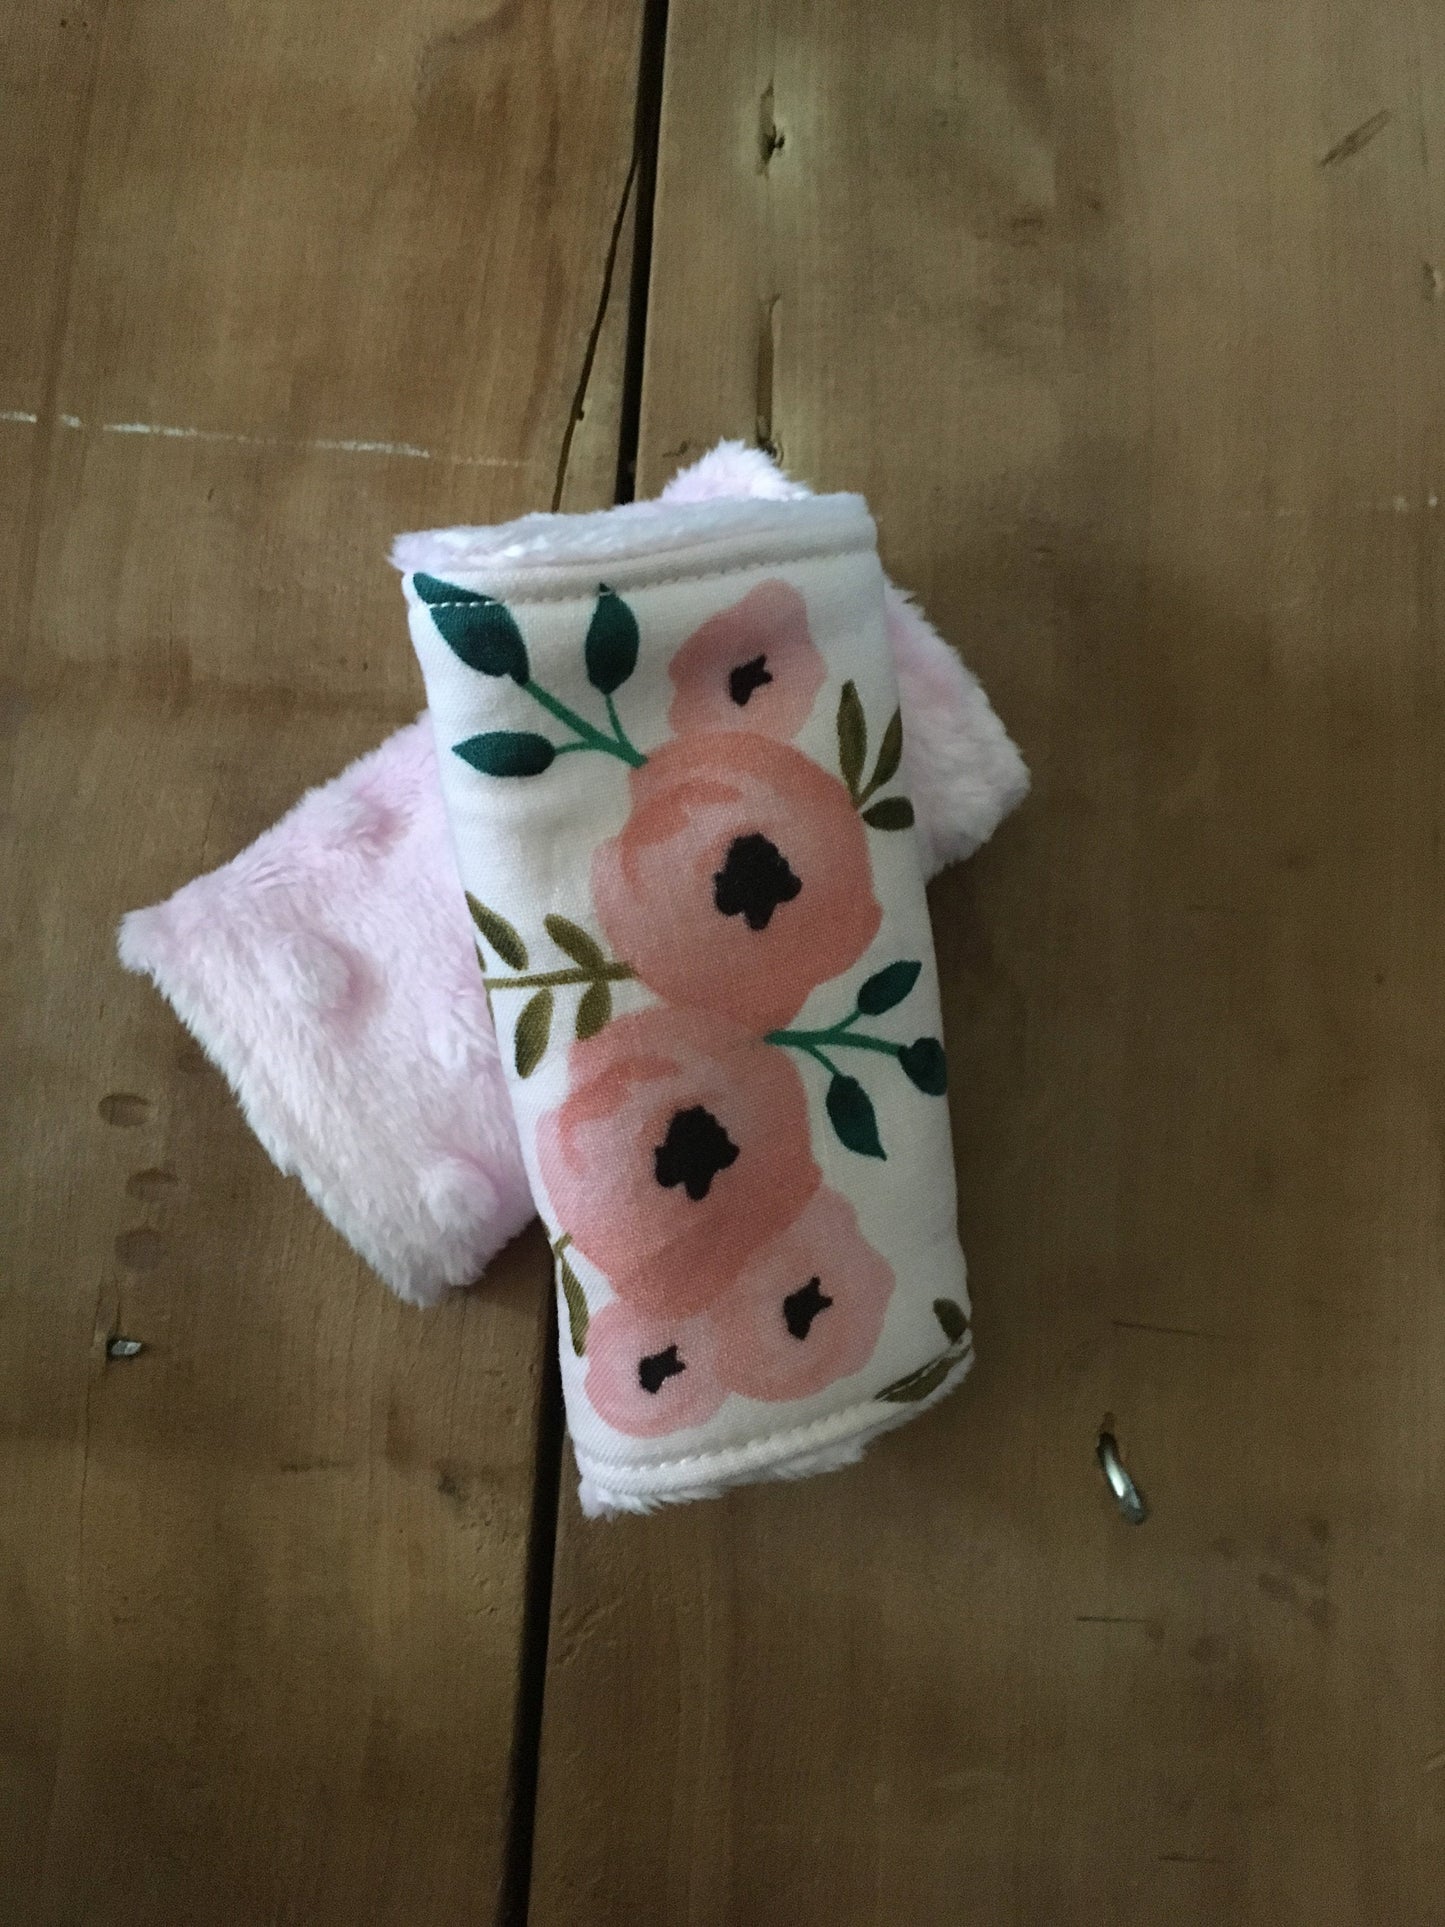 Pink Floral Seat Belt Covers for Kids, Gift for Toddler Girls